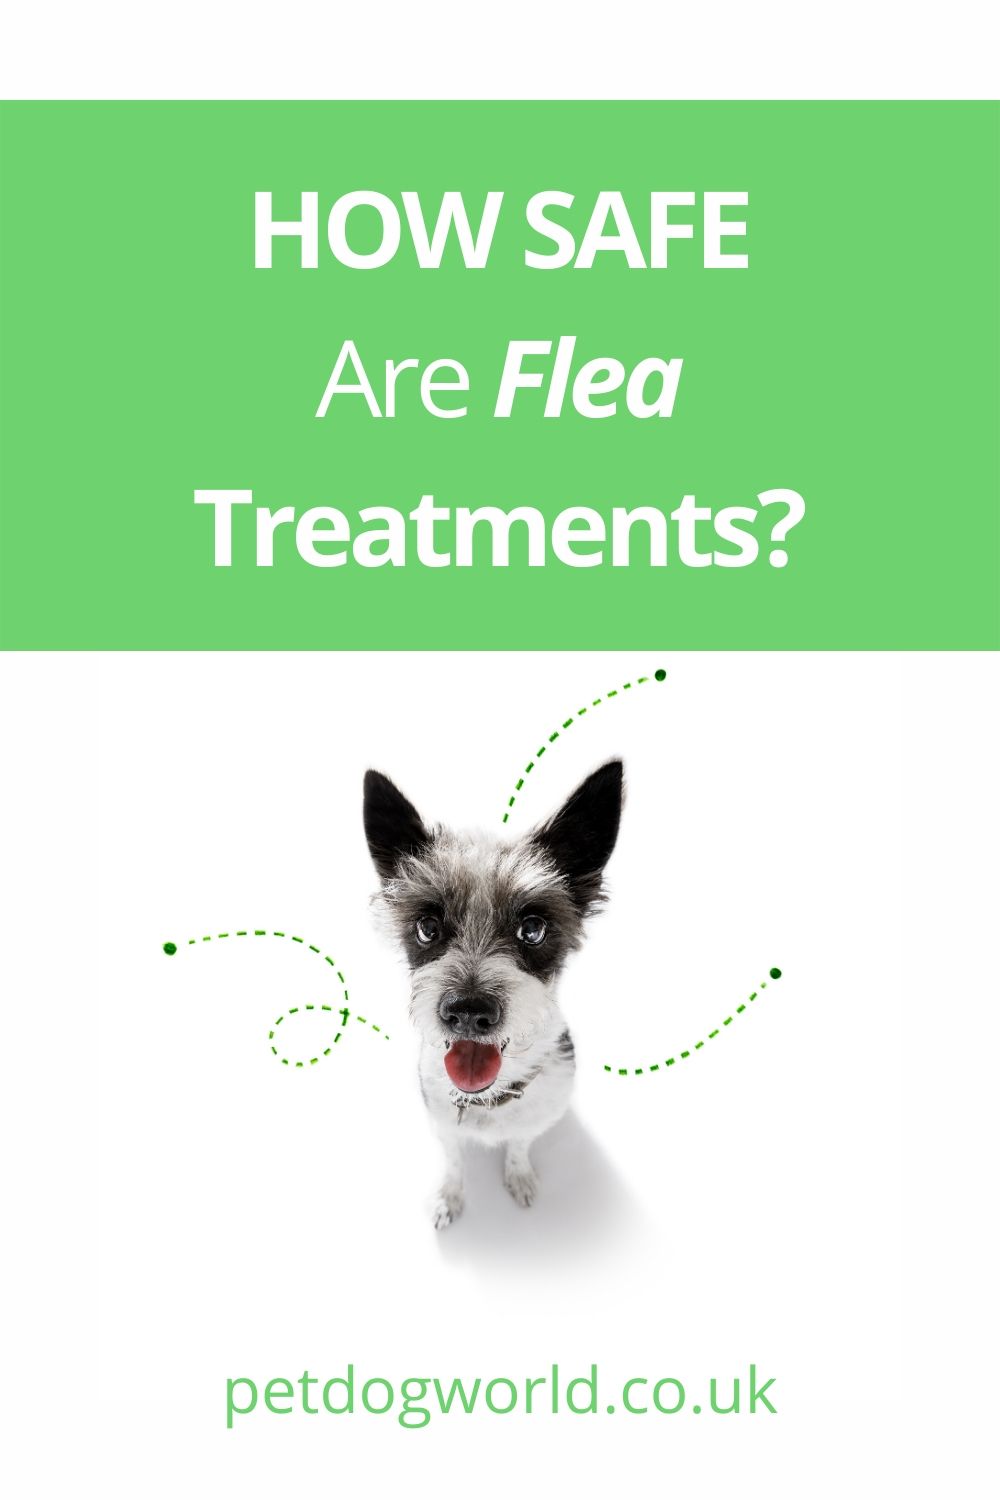 Chemical flea treatments, how safe are they?